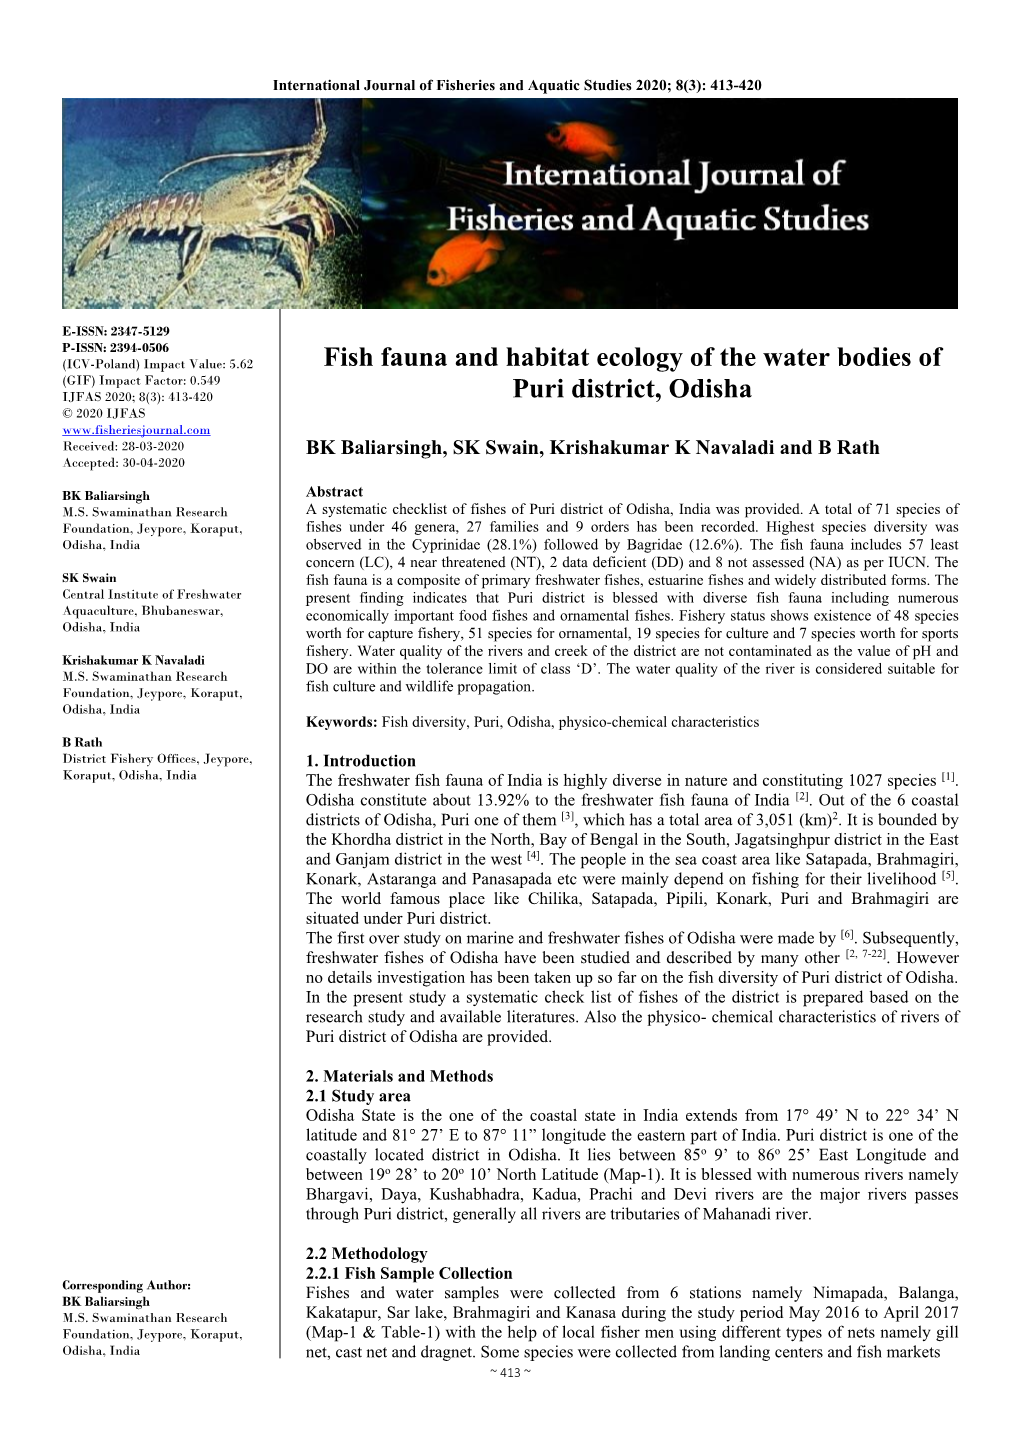 Fish Fauna and Habitat Ecology of the Water Bodies of Puri District, Odisha